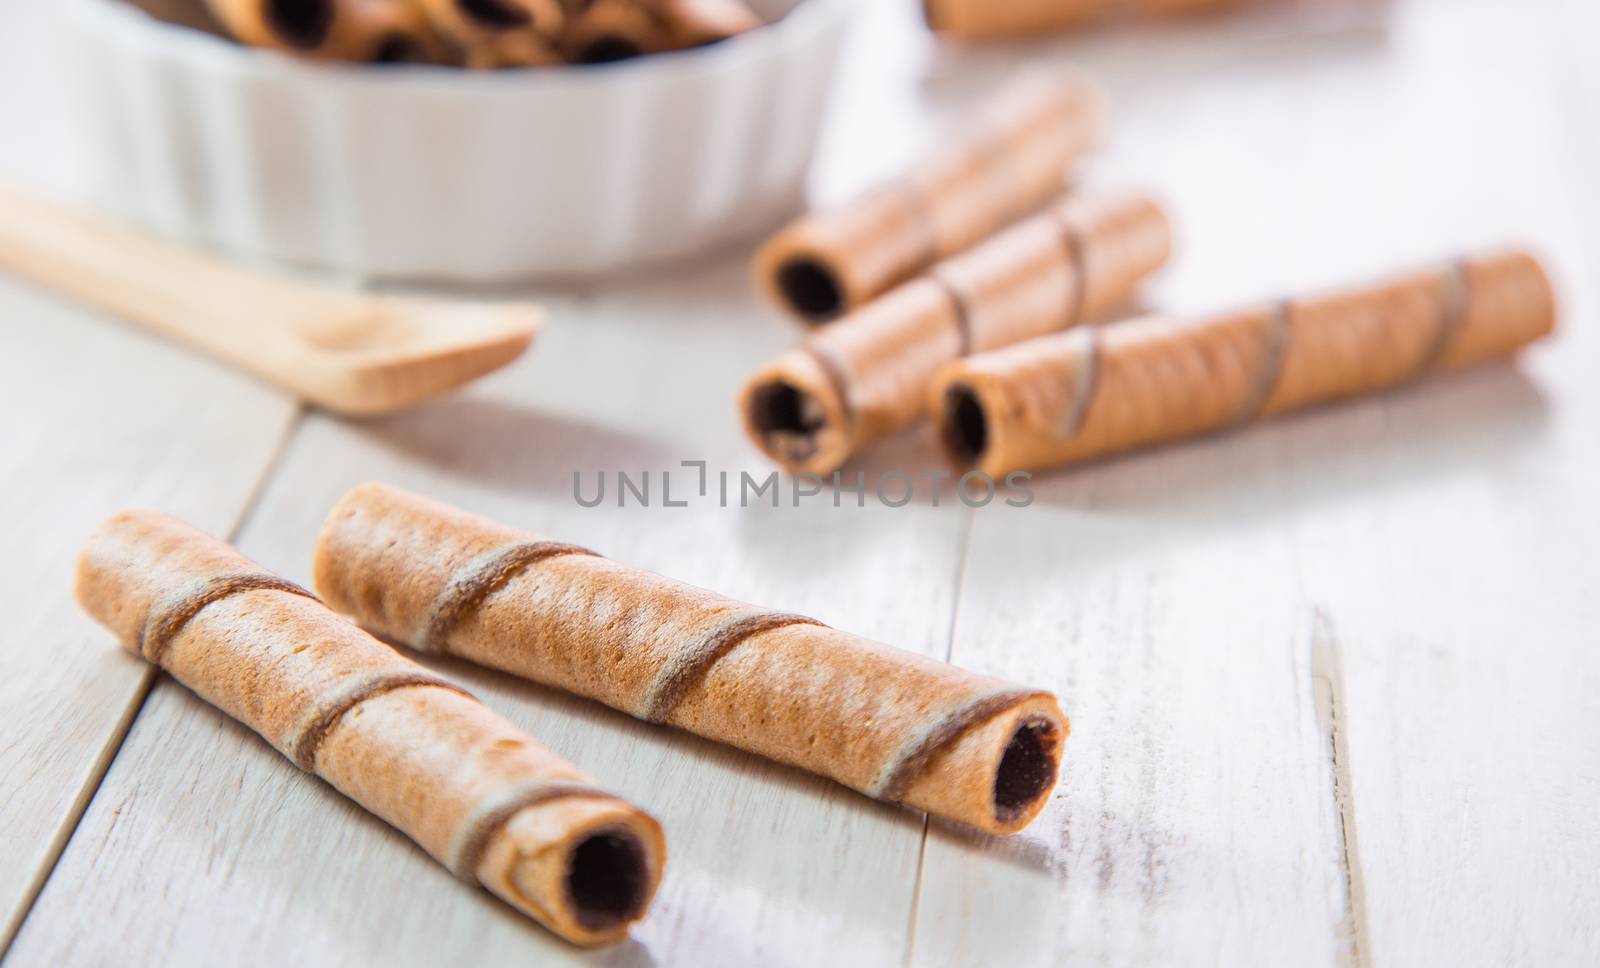 Chocolate wafer roll by tehcheesiong